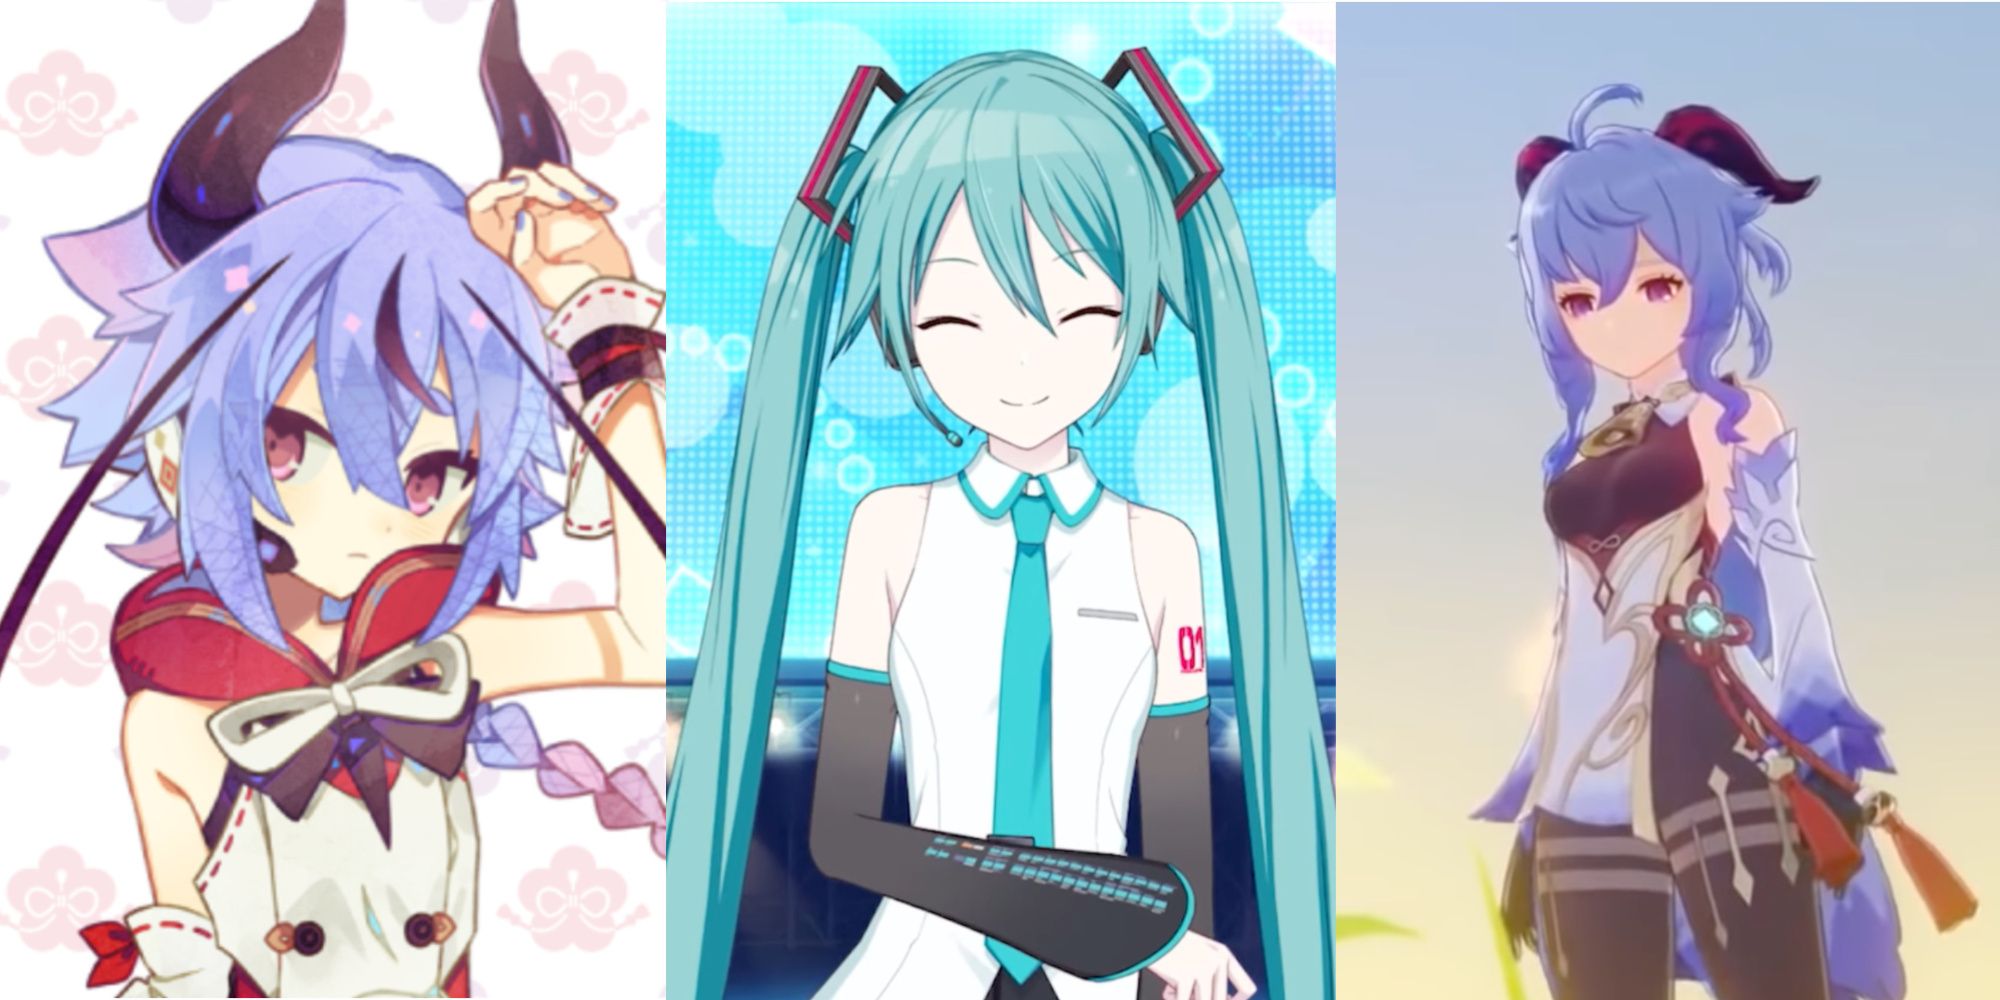 Meika Mikoto from Vocaloid 5, Hatsune Miku from Hatsune Miku: Colorful Stage, and Ganyu from Genshin Impact